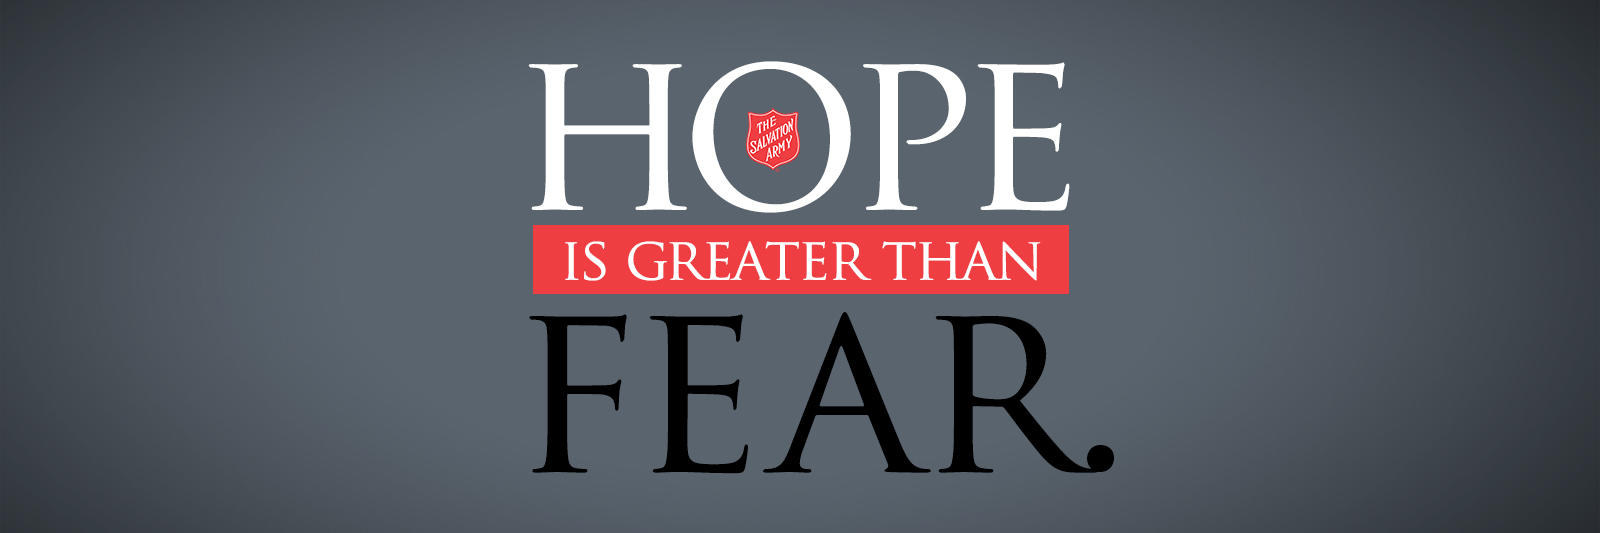 Hope Greater Than Fear